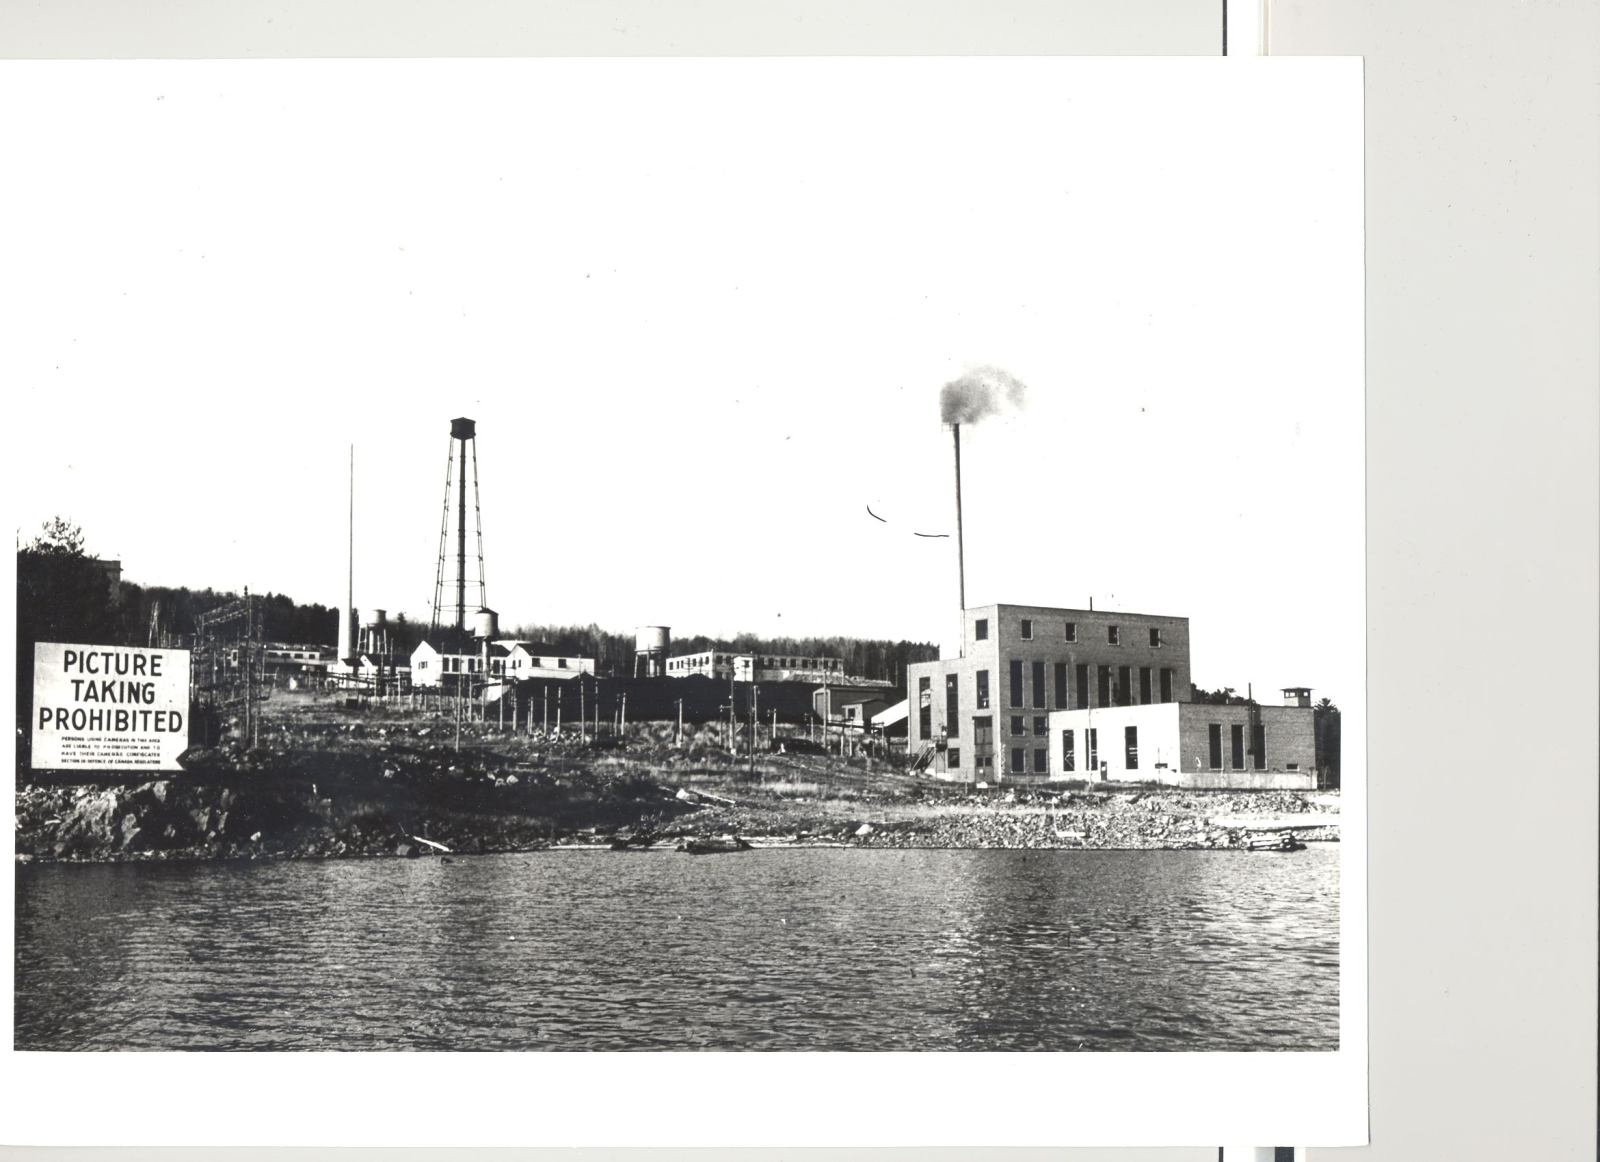 Chalk River Labs photographed from the Ottawa River in the late 1940s. Includes a sign on the shore saying 